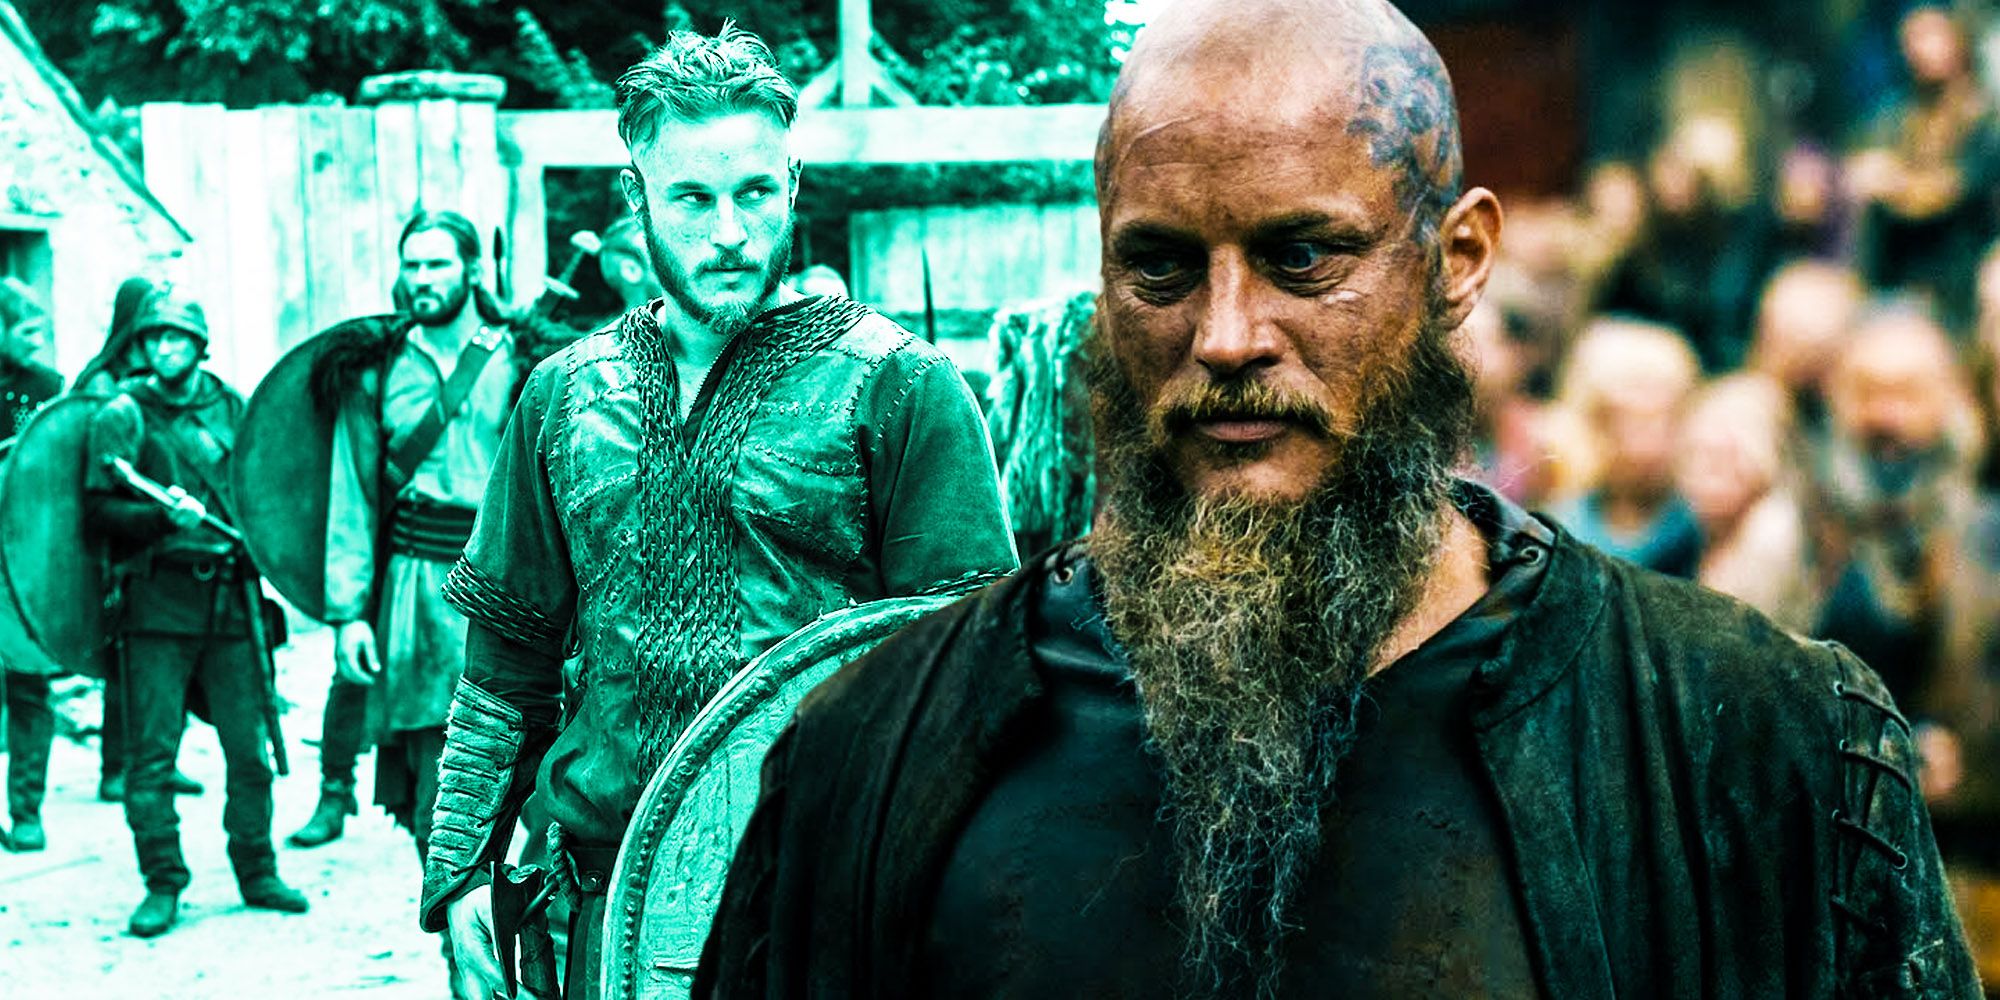 Which son of Ragnar will survive to carry on his father's legacy? Find out  on the mid-season finale of #Vikings TOMORROW at 10/9c on…